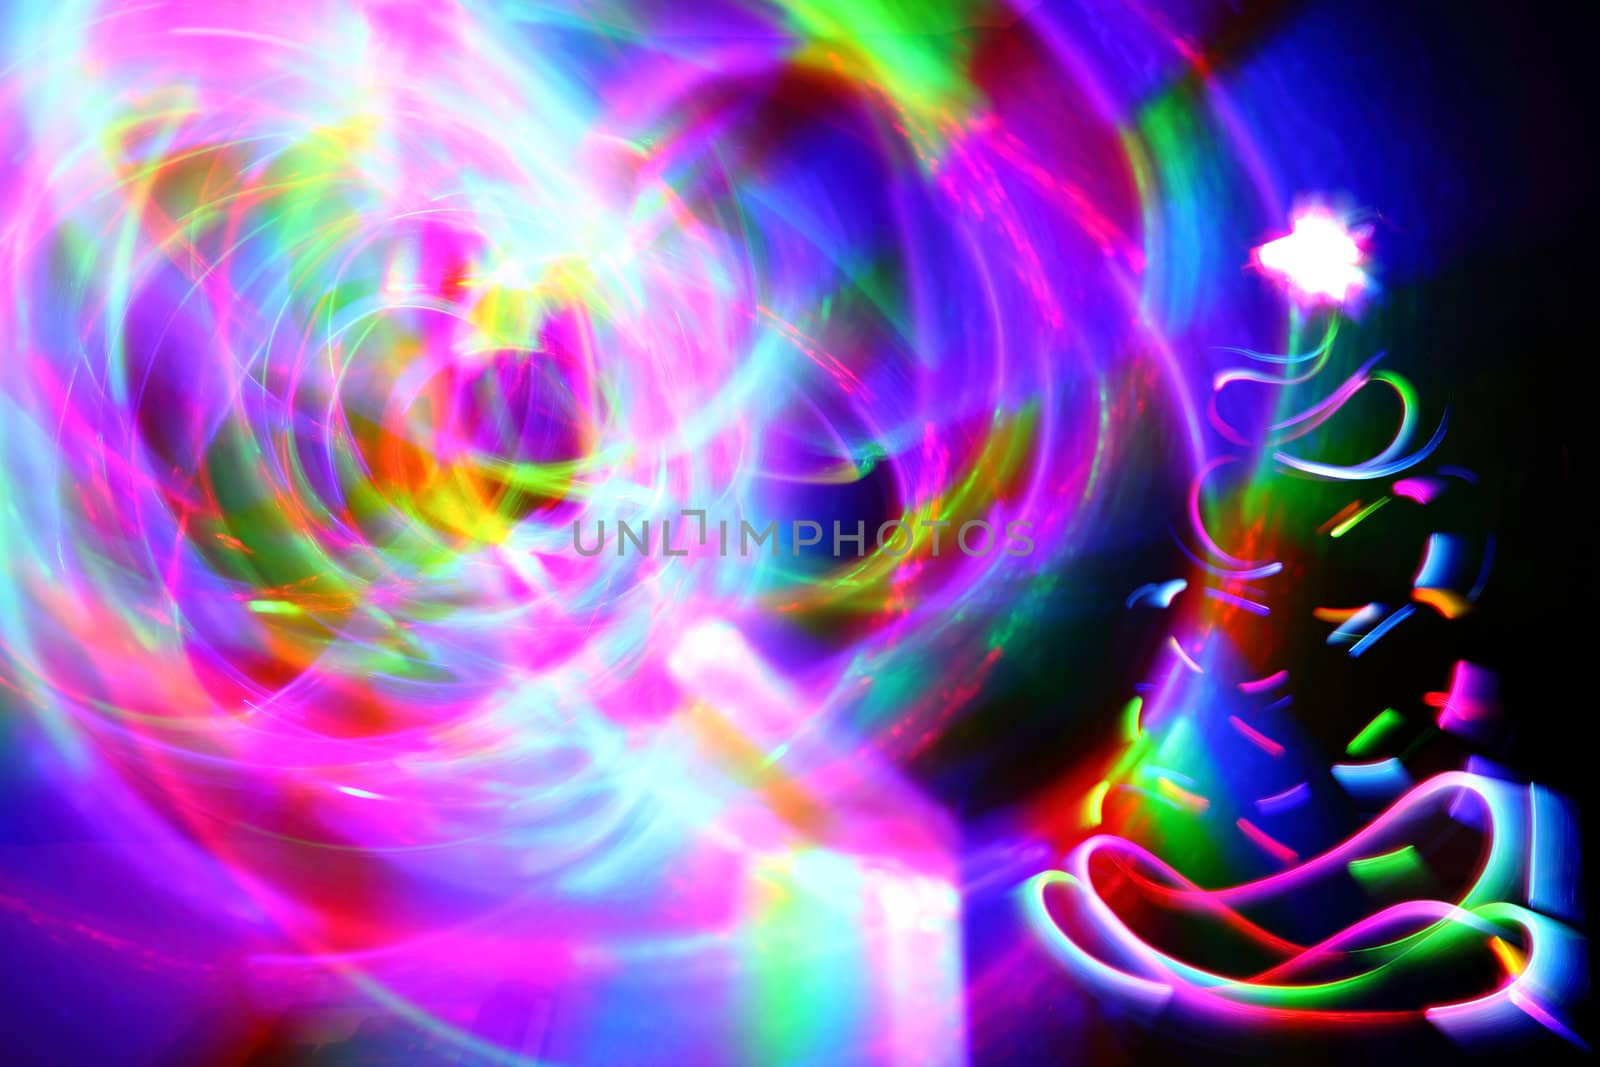 abstract xmas background from the color chrismtas lights